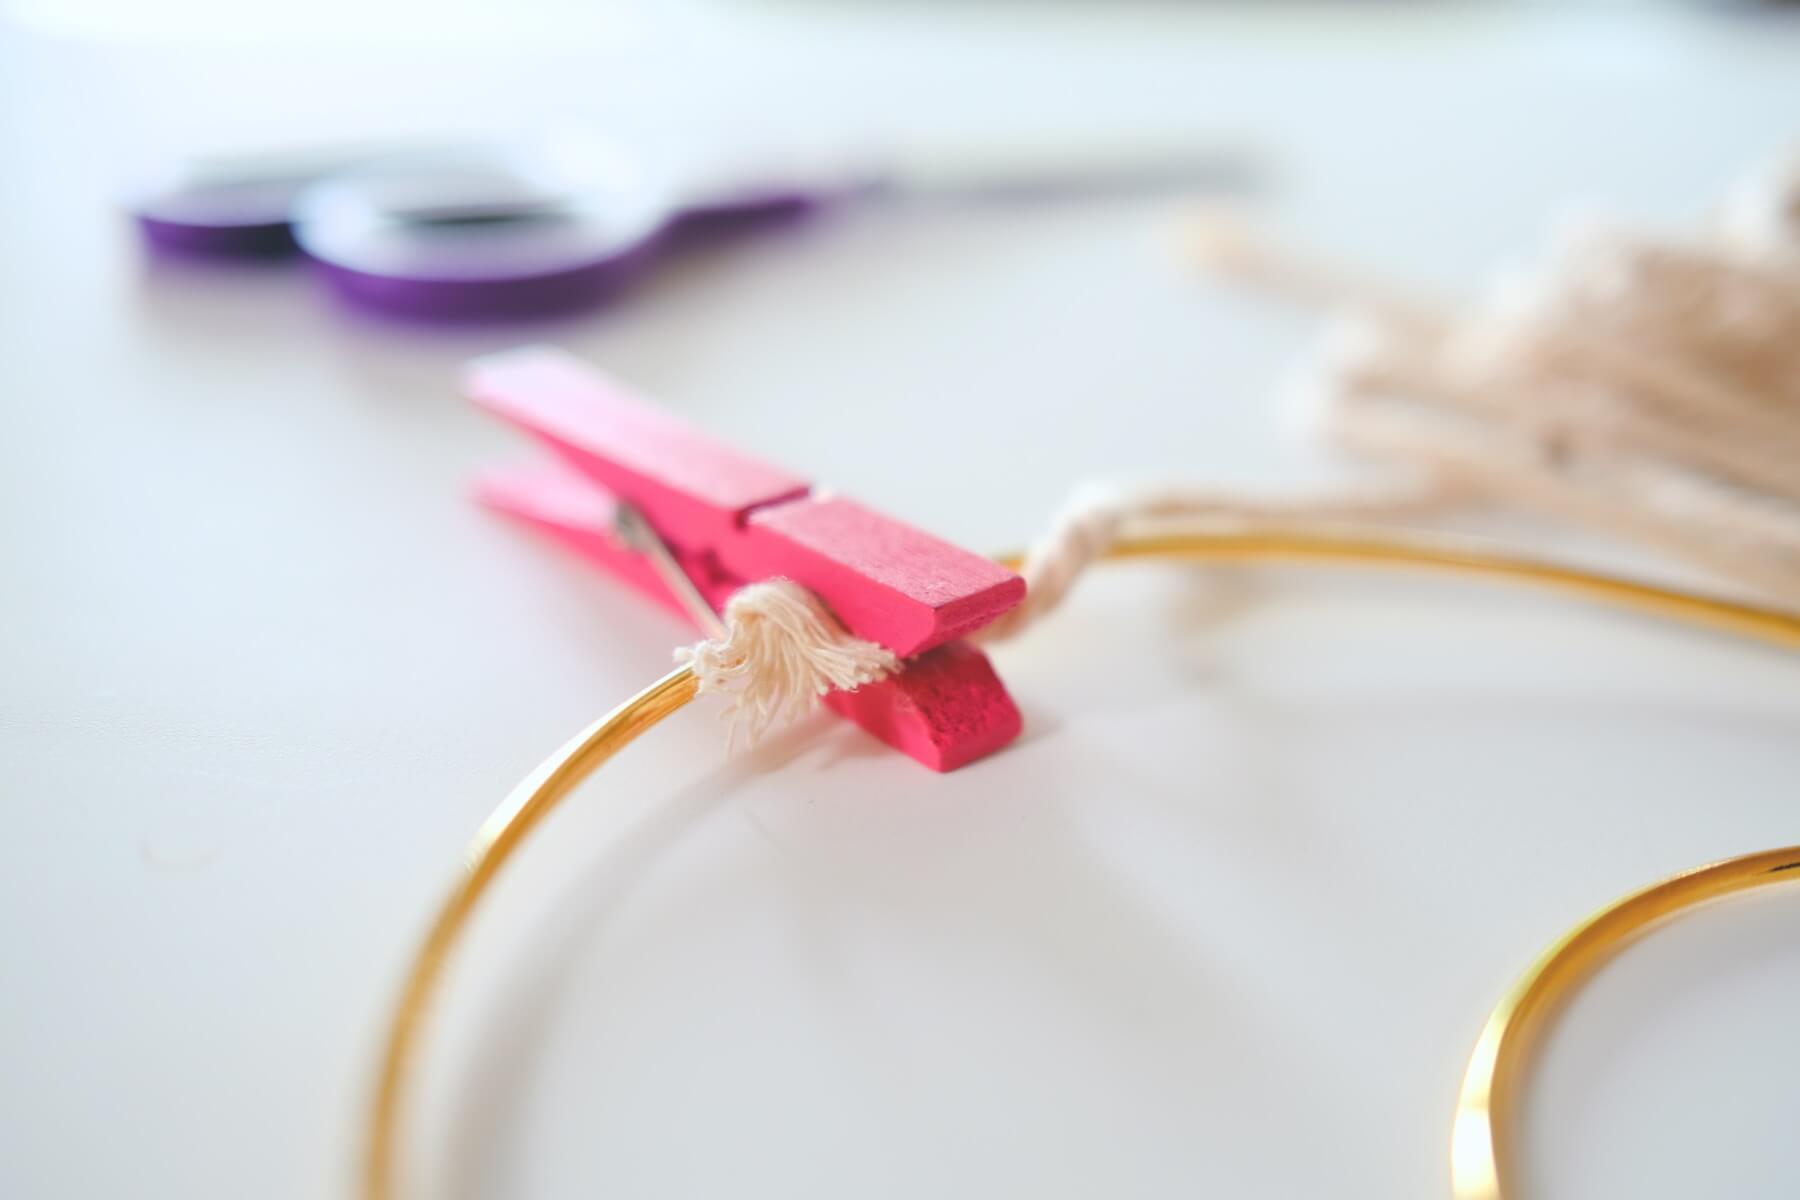 use a clothespin to hold the macrame cord in place